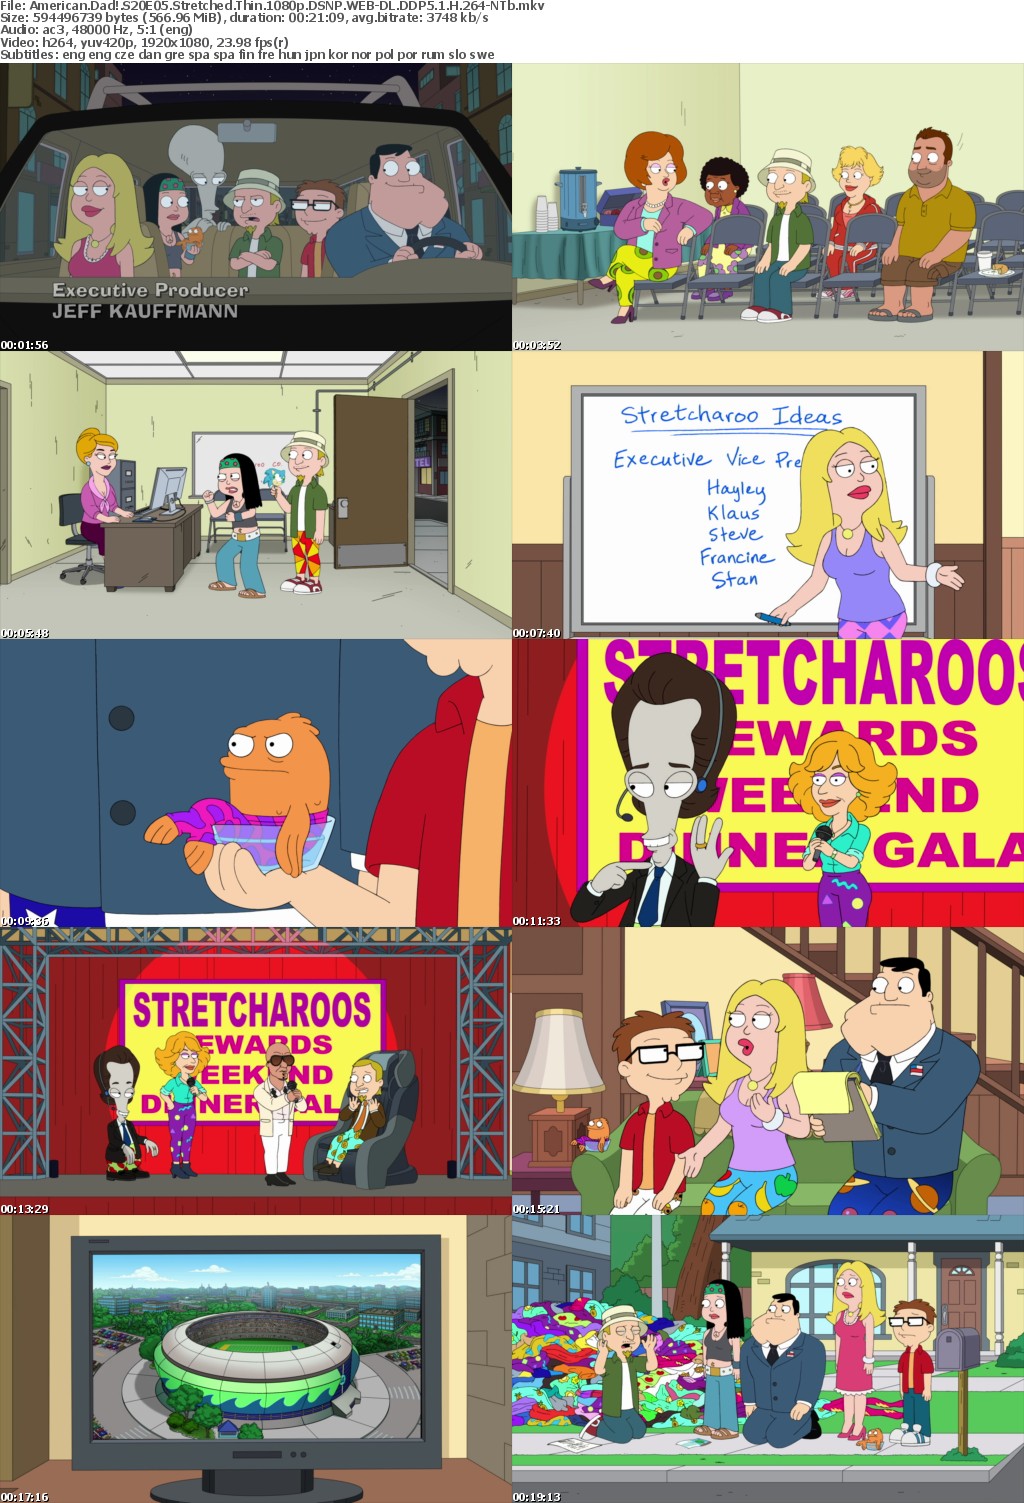 American Dad! S20E05 Stretched Thin 1080p DSNP WEB-DL DDP5 1 H 264-NTb